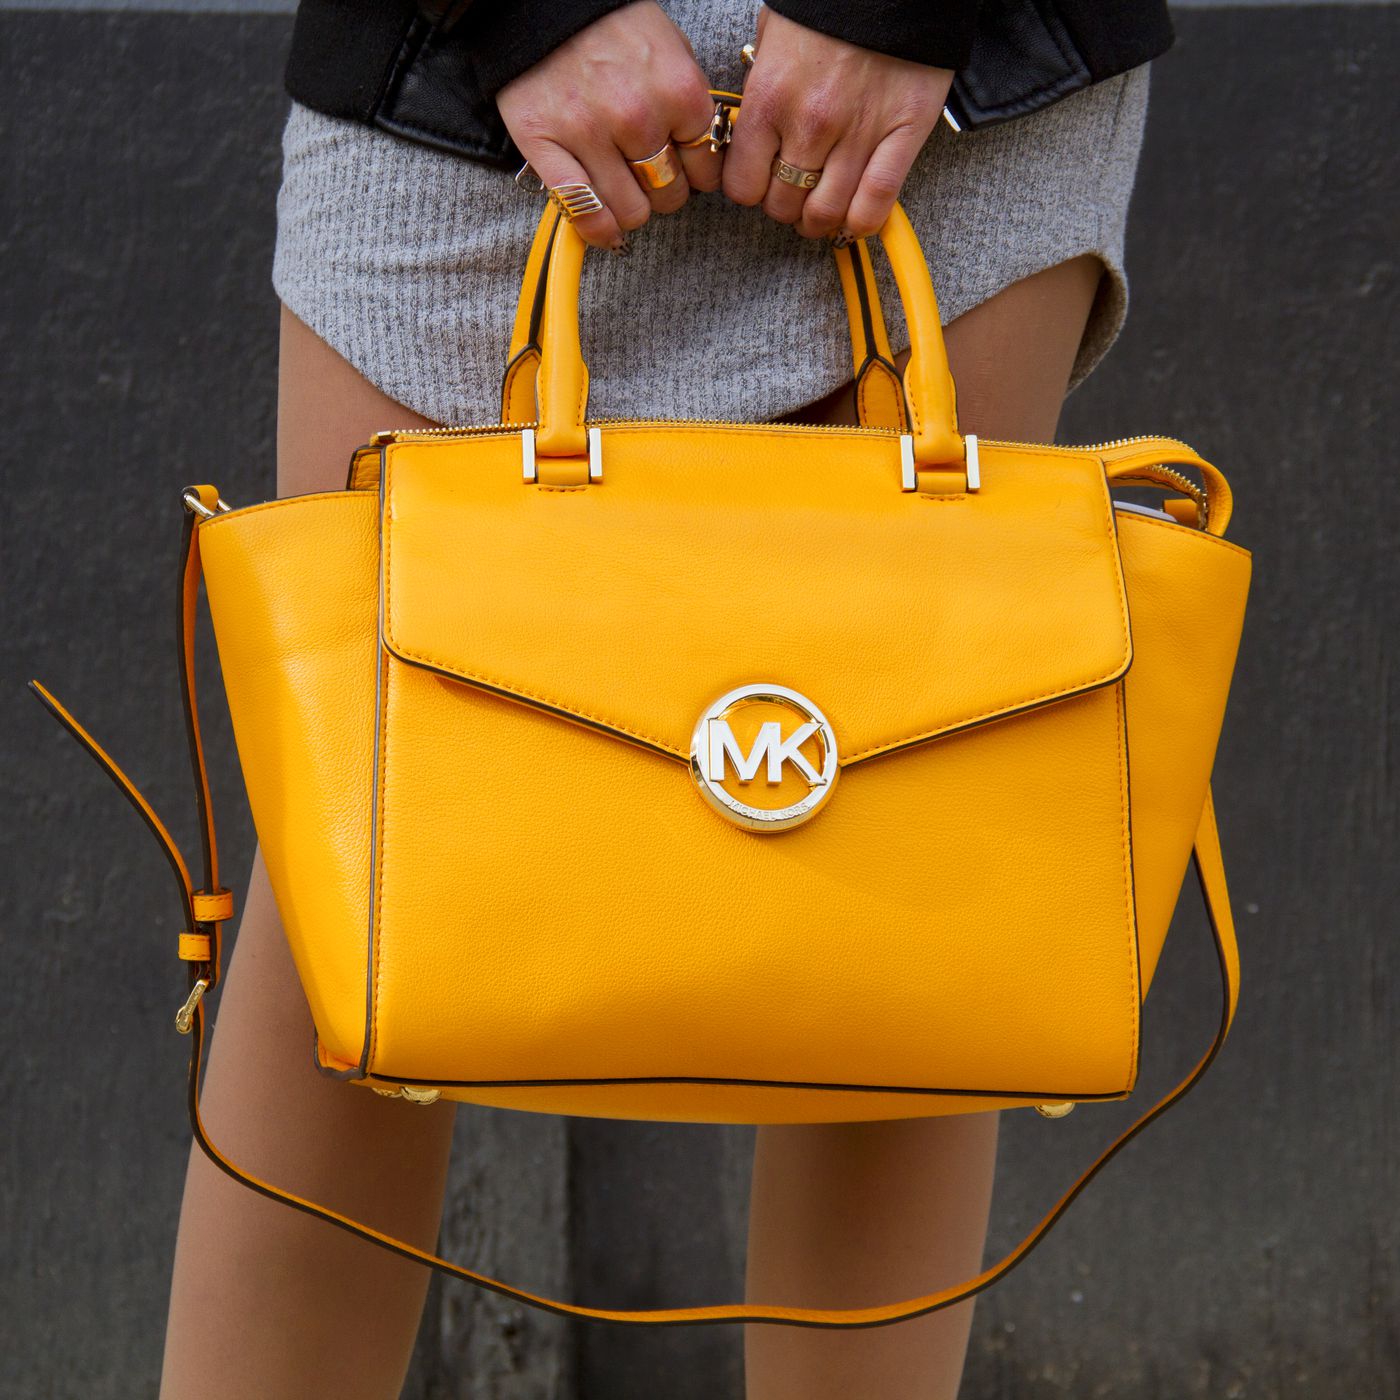 Some Nordstrom Stores Have Stopped Selling Michael Kors Bags, According to  Report - Racked